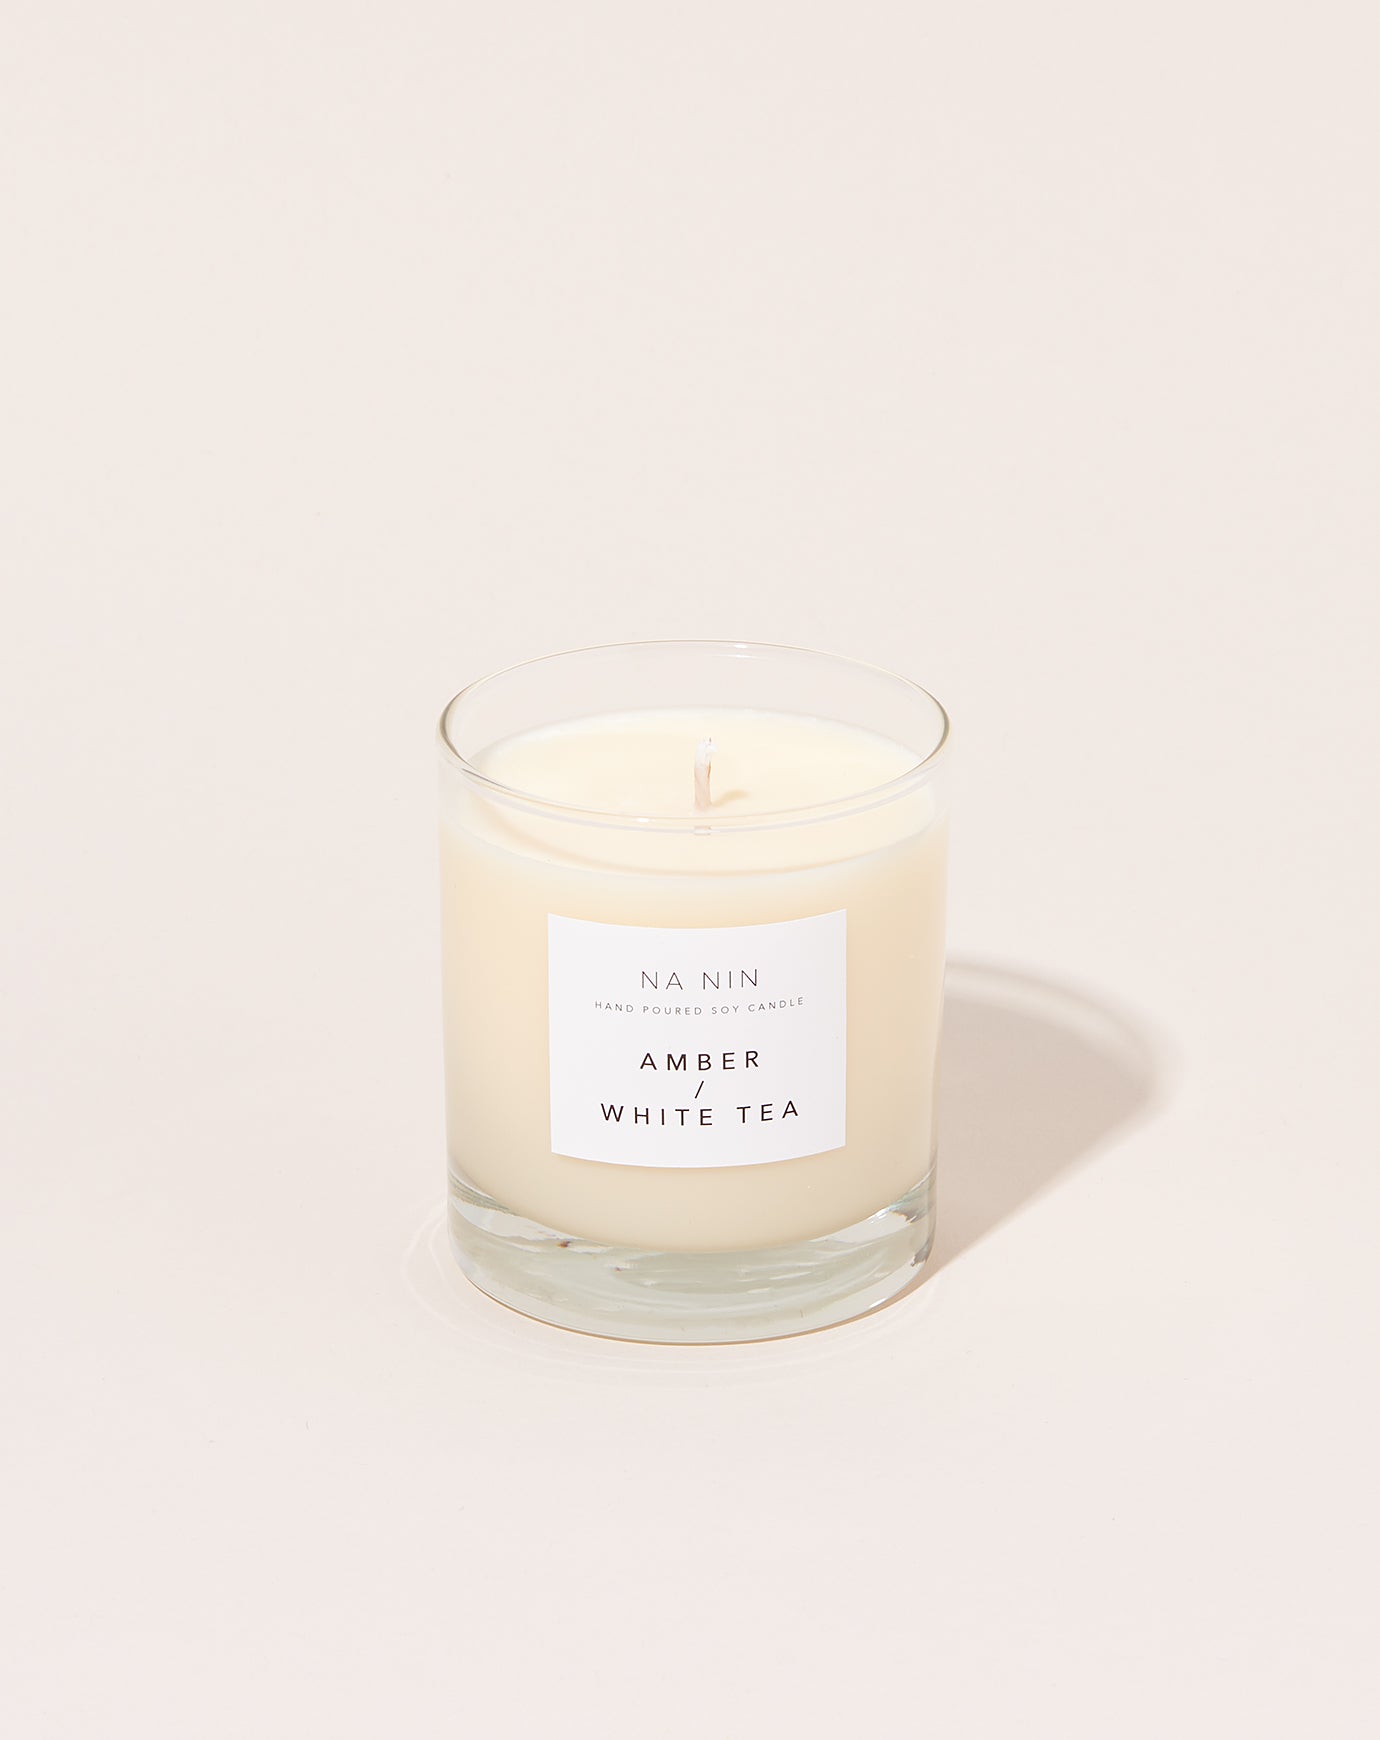 Na Nin Pairings Collection Candle in White Tea / Amber